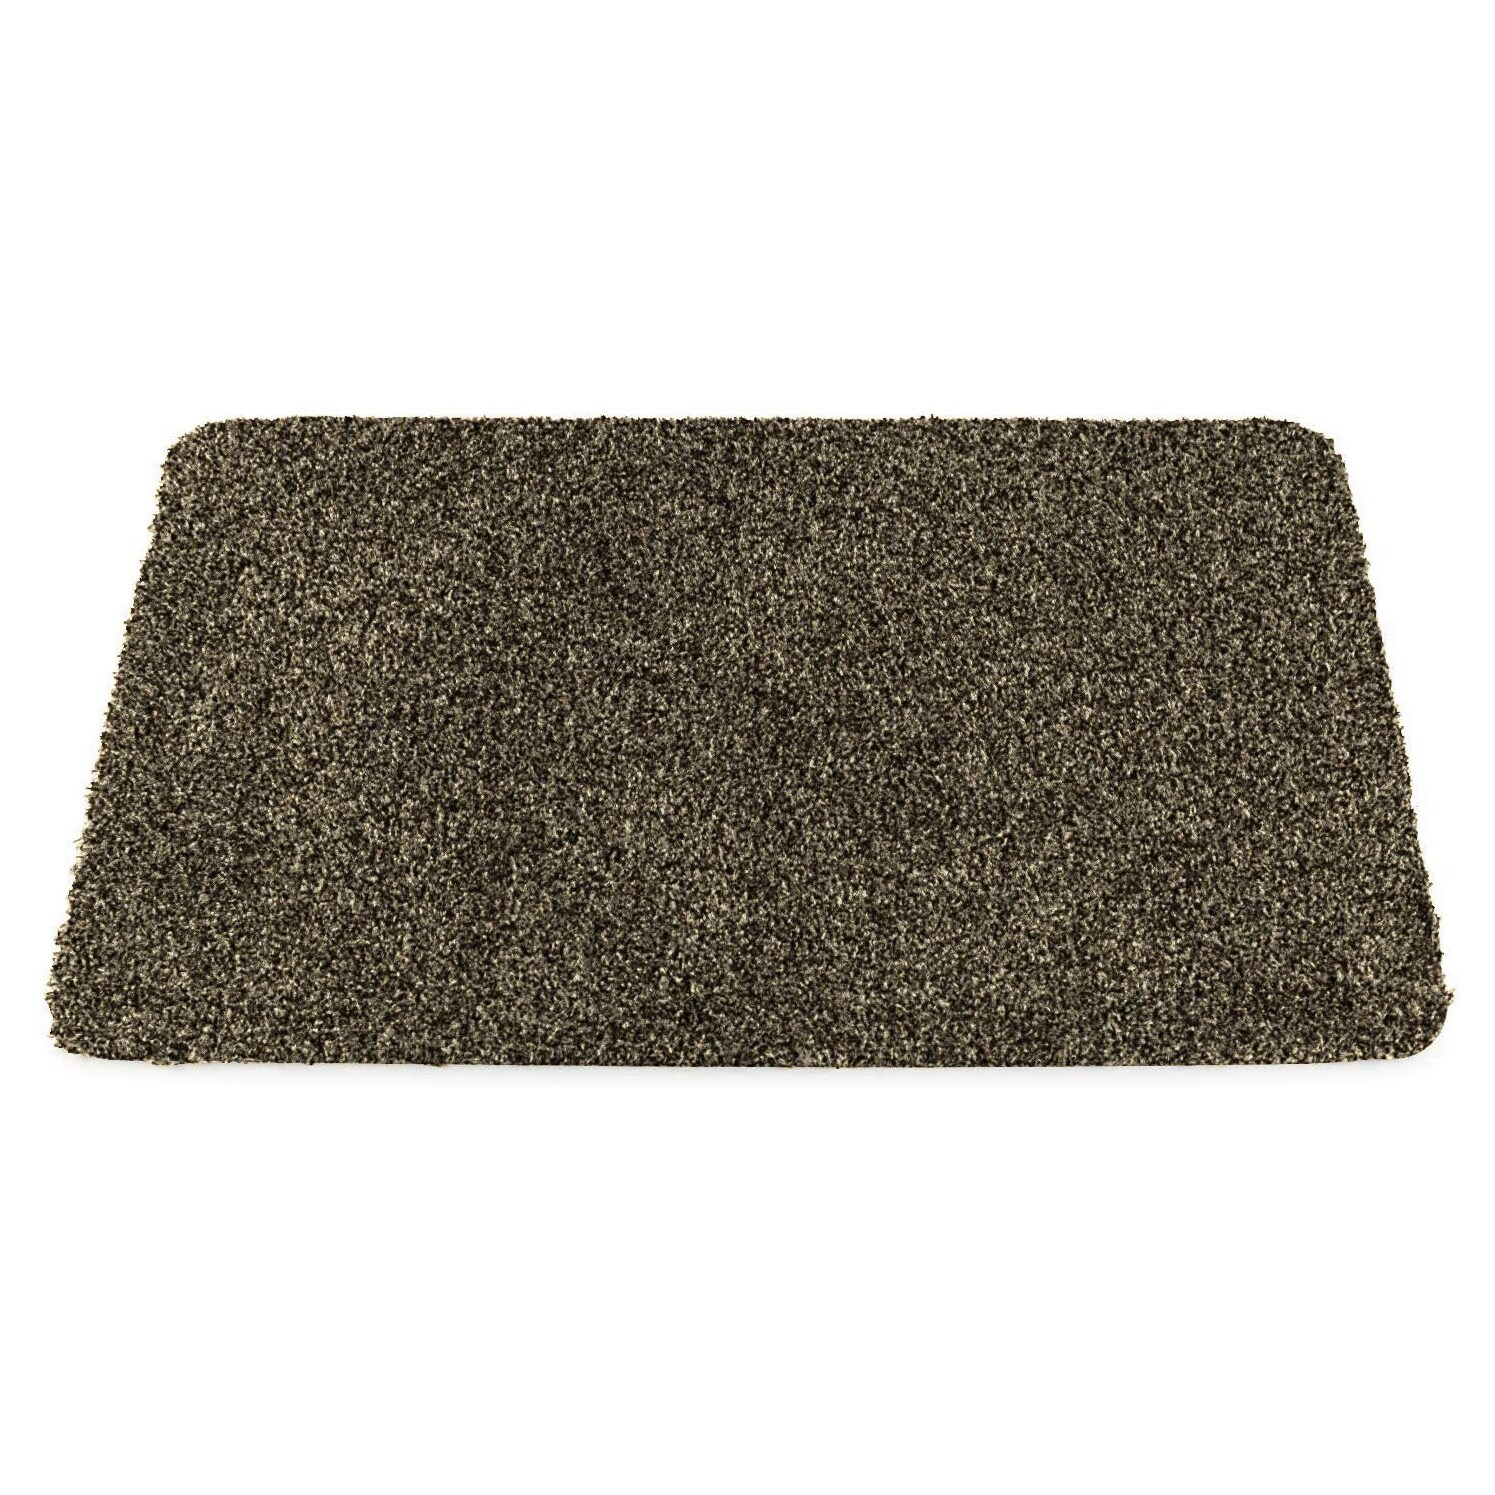 https://ak1.ostkcdn.com/images/products/is/images/direct/435addbef0990900581ea8b321ae99a556b1405c/Door-Mat%2C-Entry-Rug%2C-Super-Absorbent%2C-20-X-30.jpg